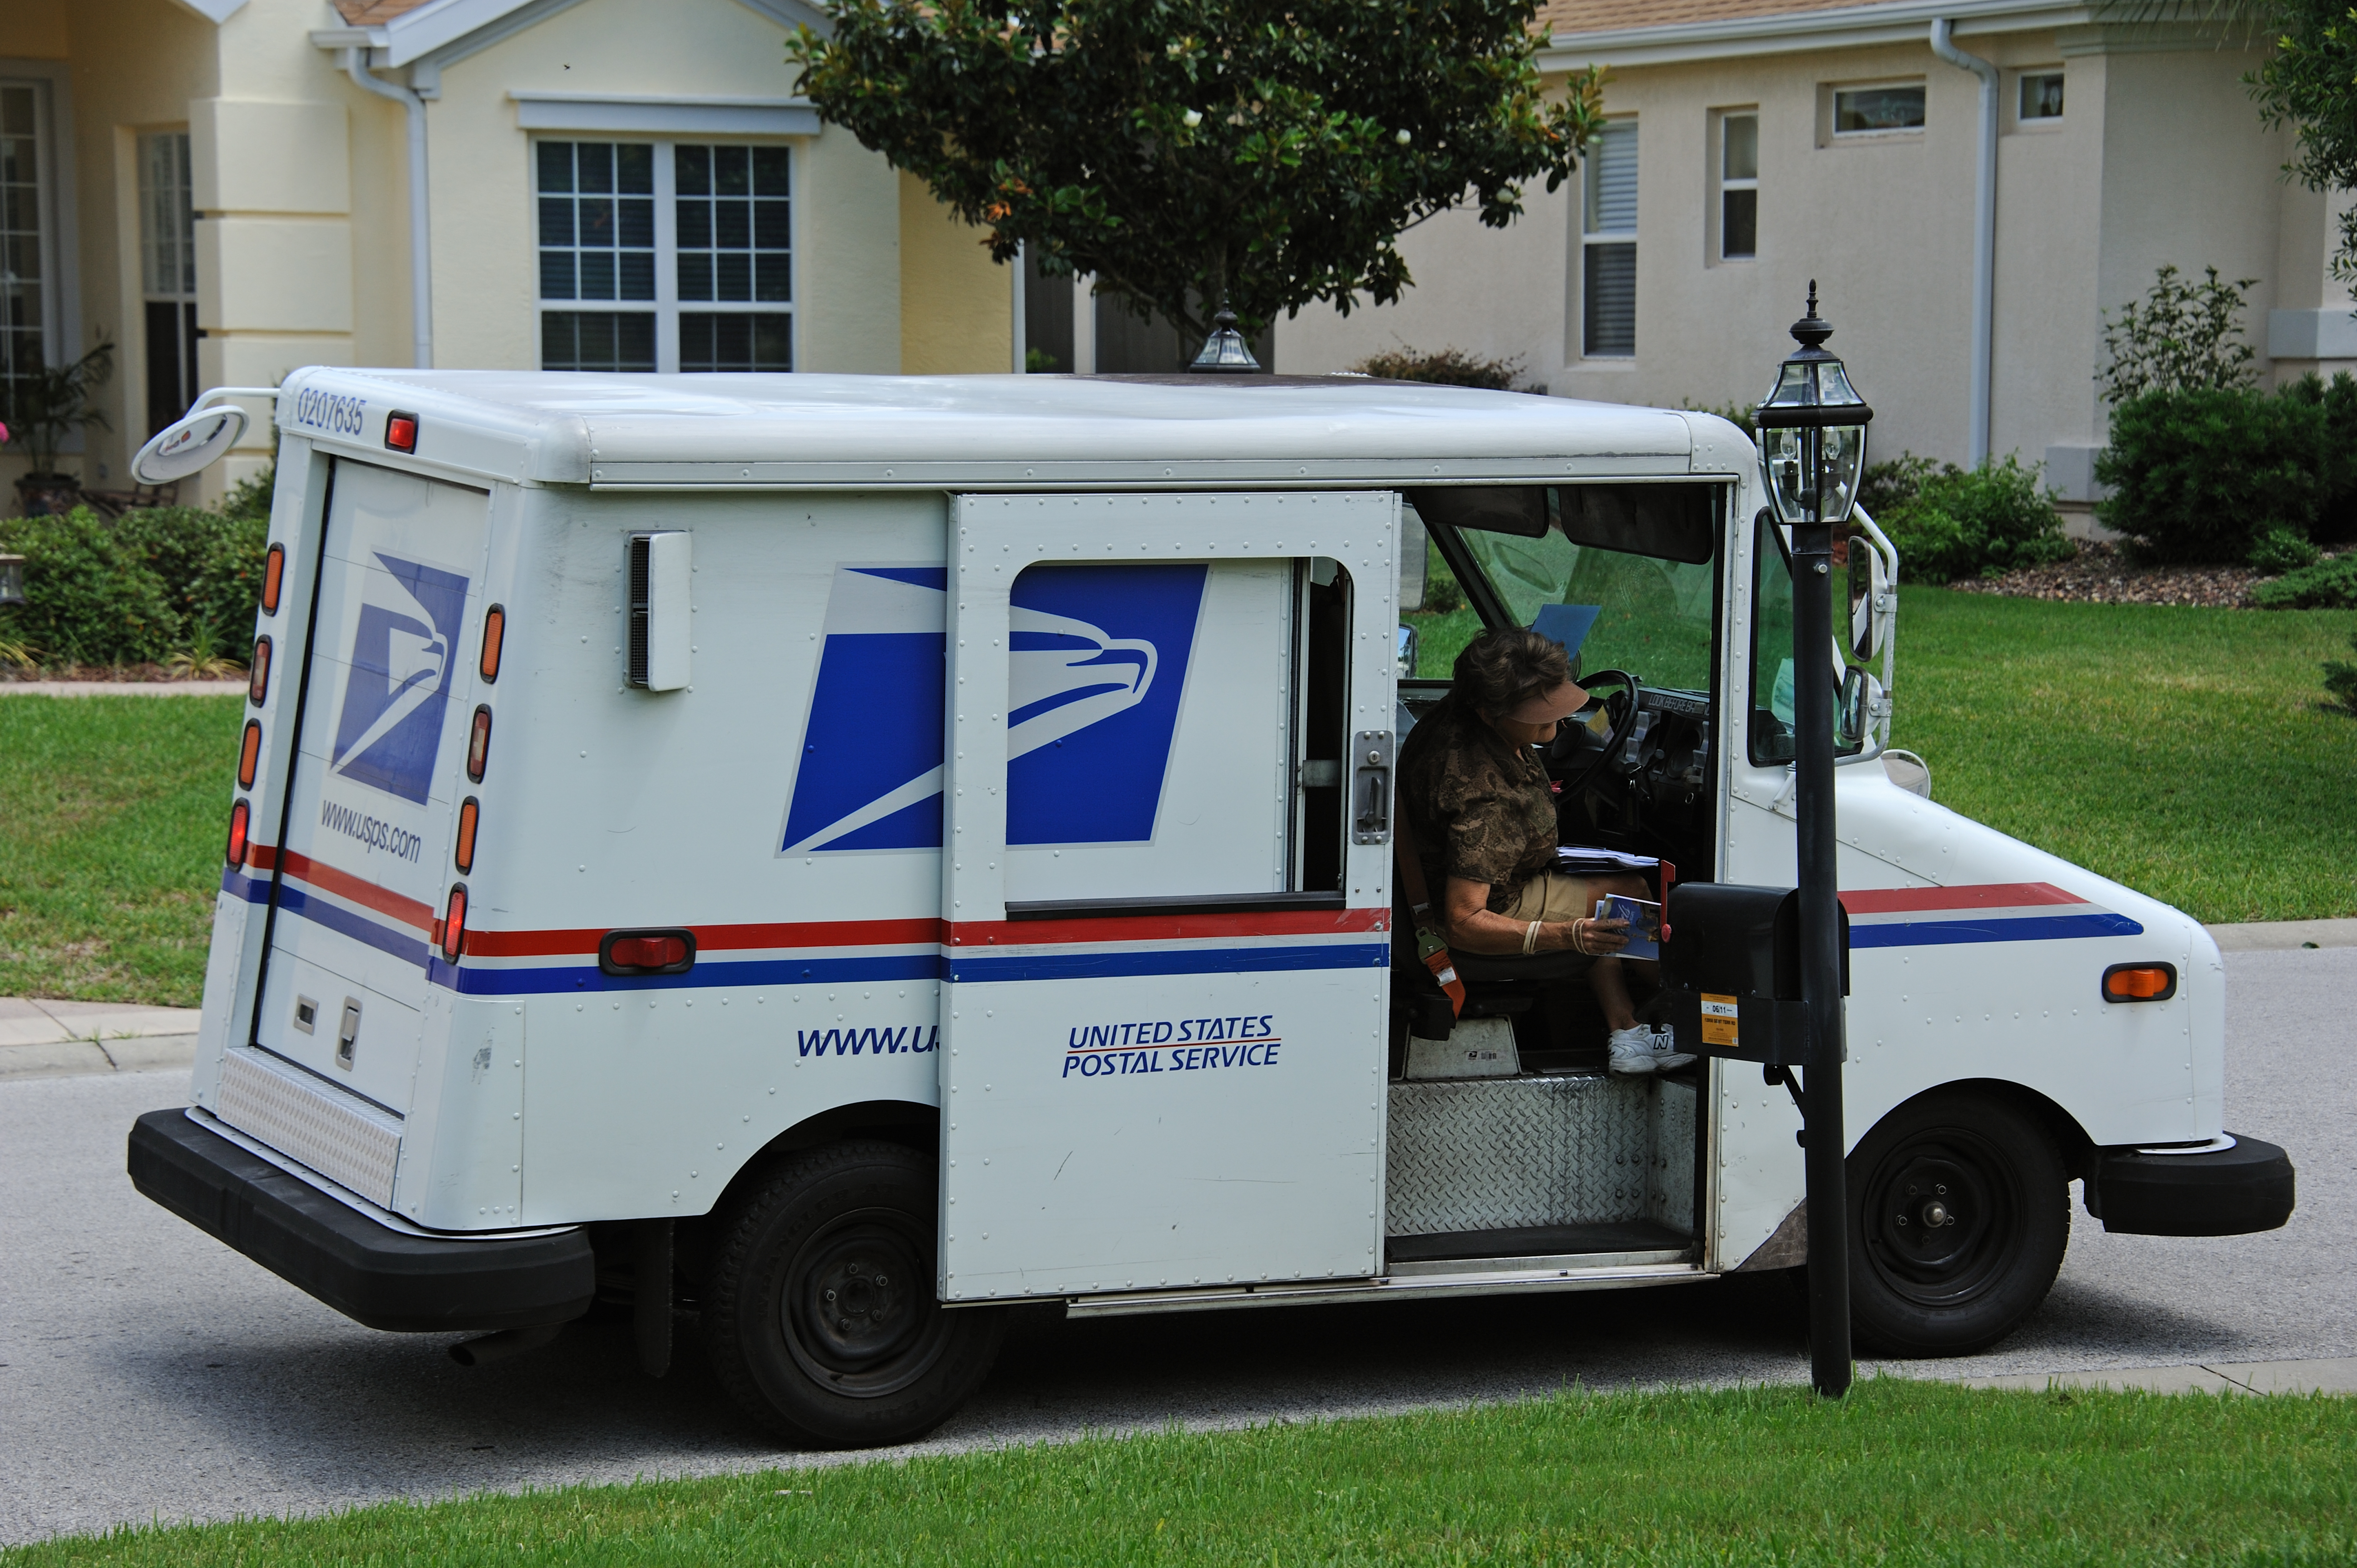 Is USPS A Federal Job? + Other Commonly Asked Questions